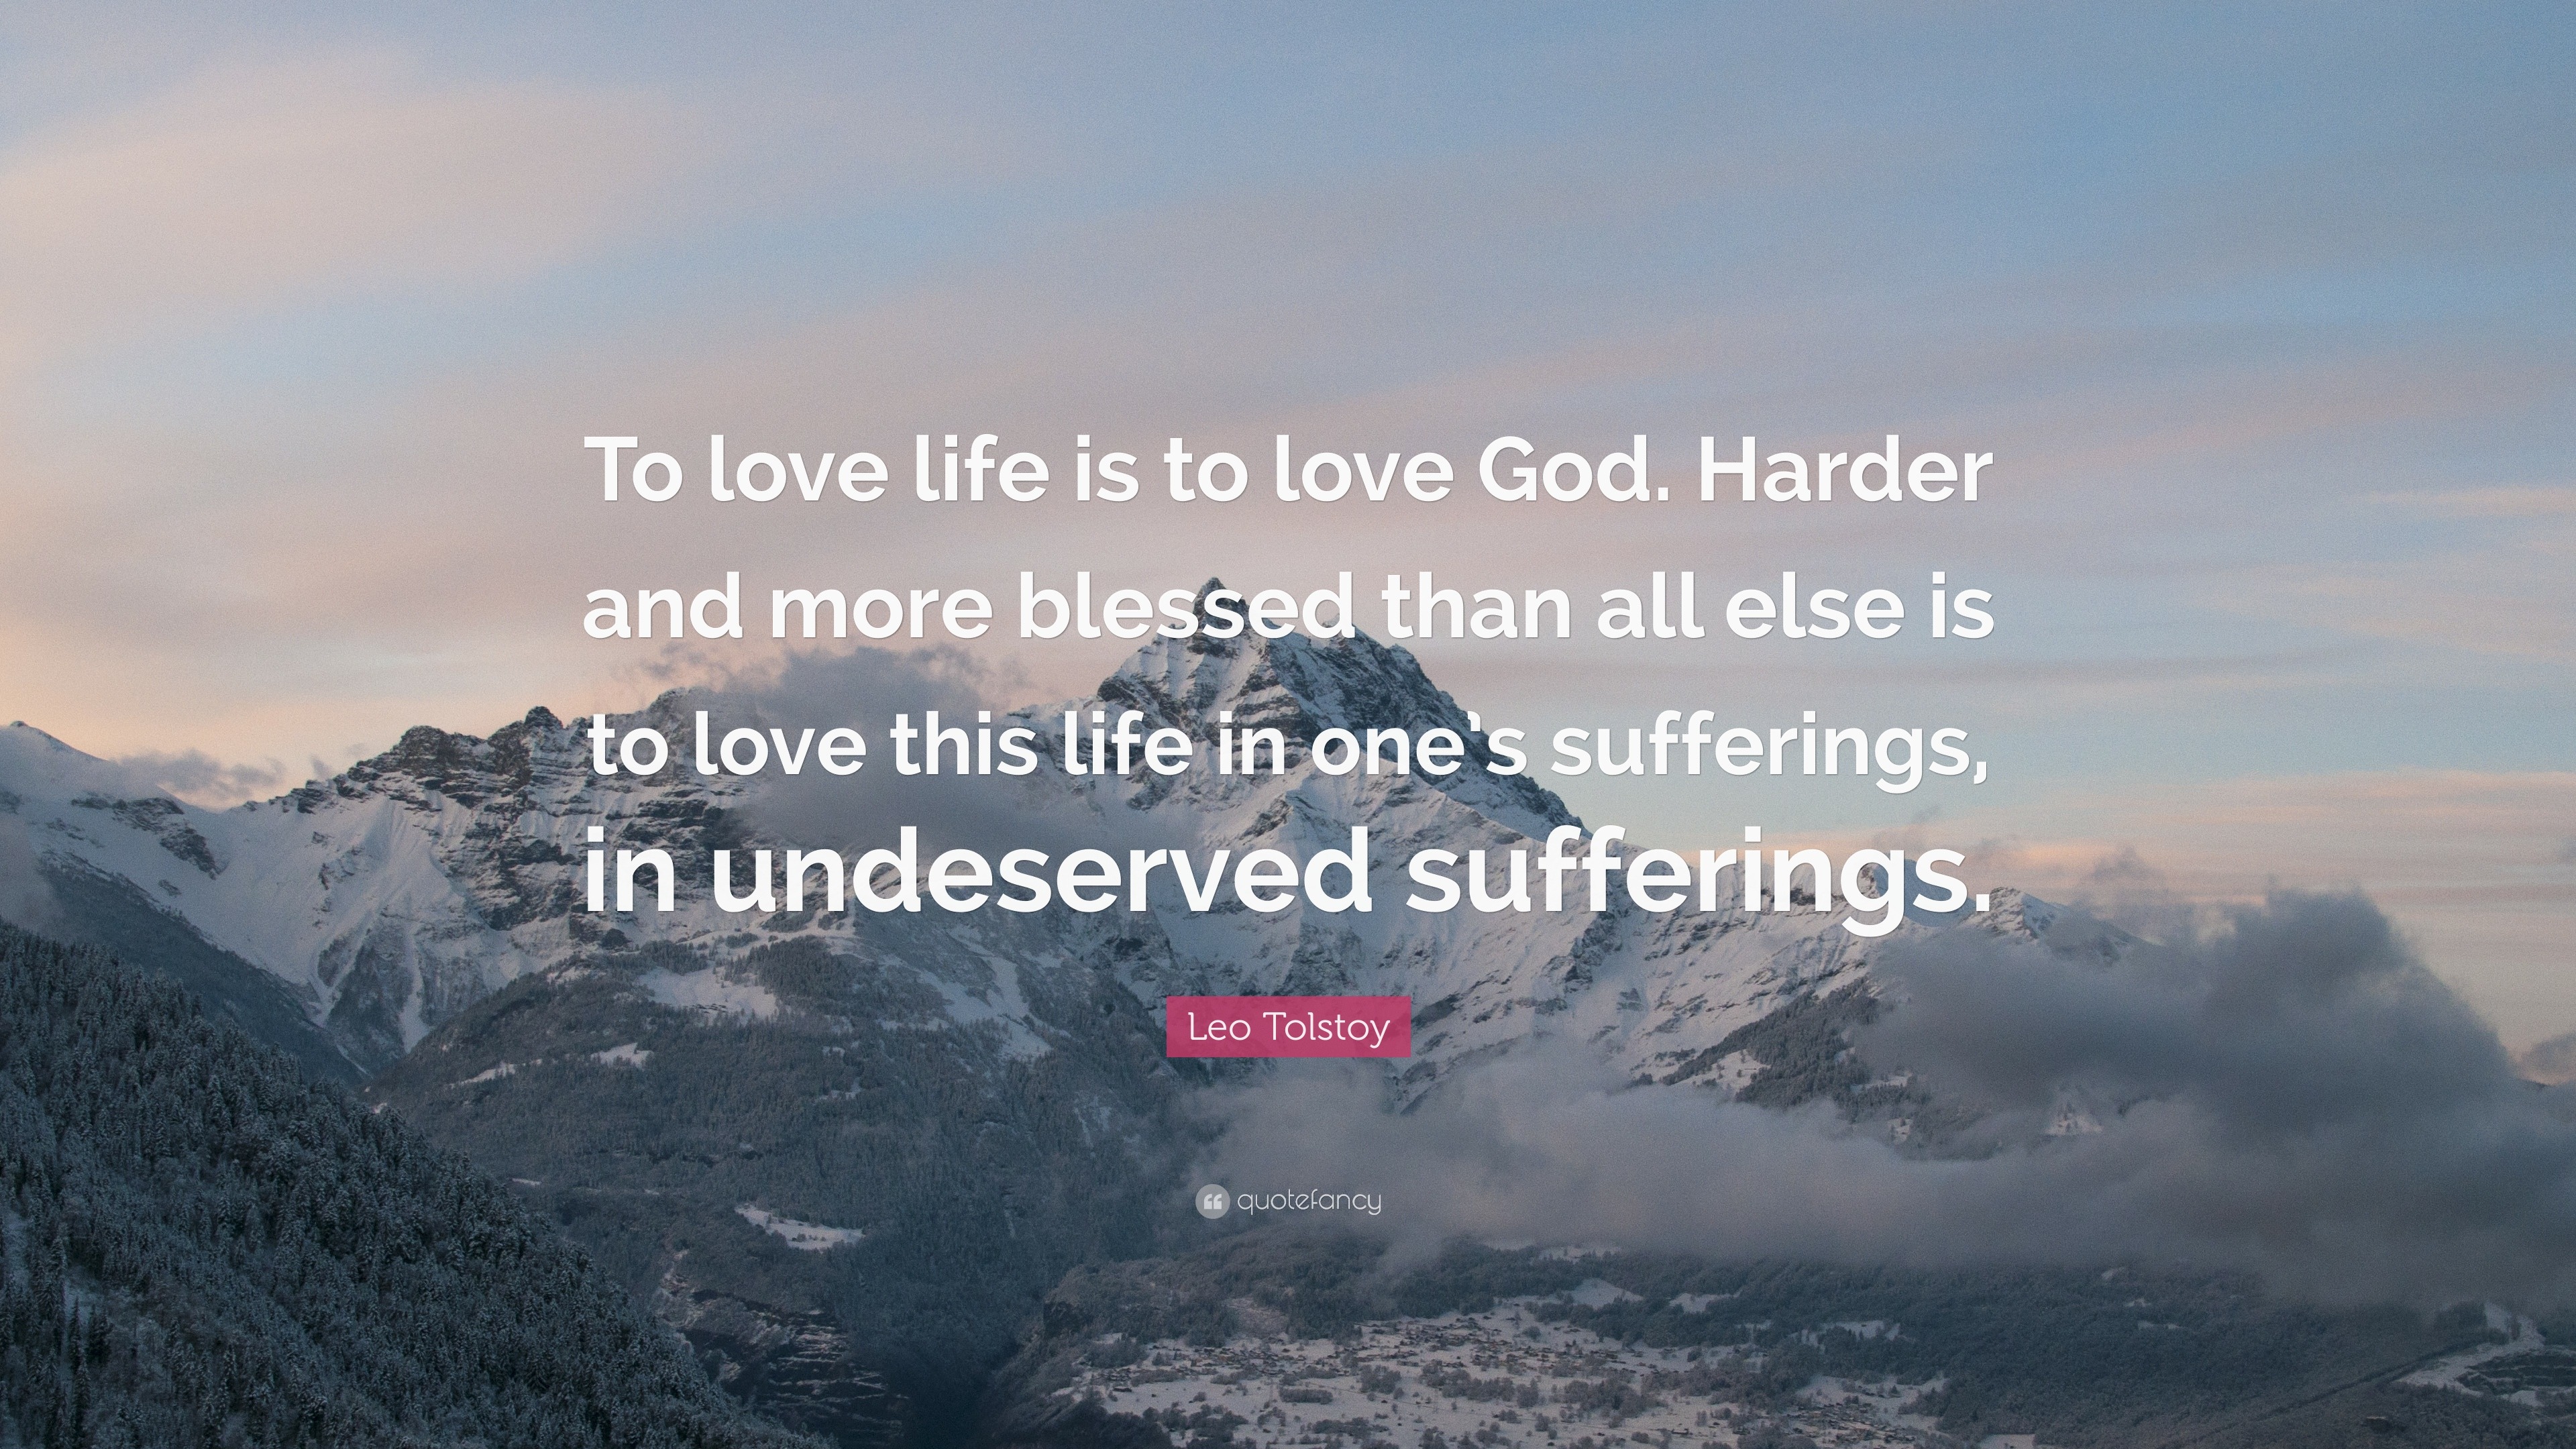 Leo Tolstoy Quote “To love life is to love God Harder and more